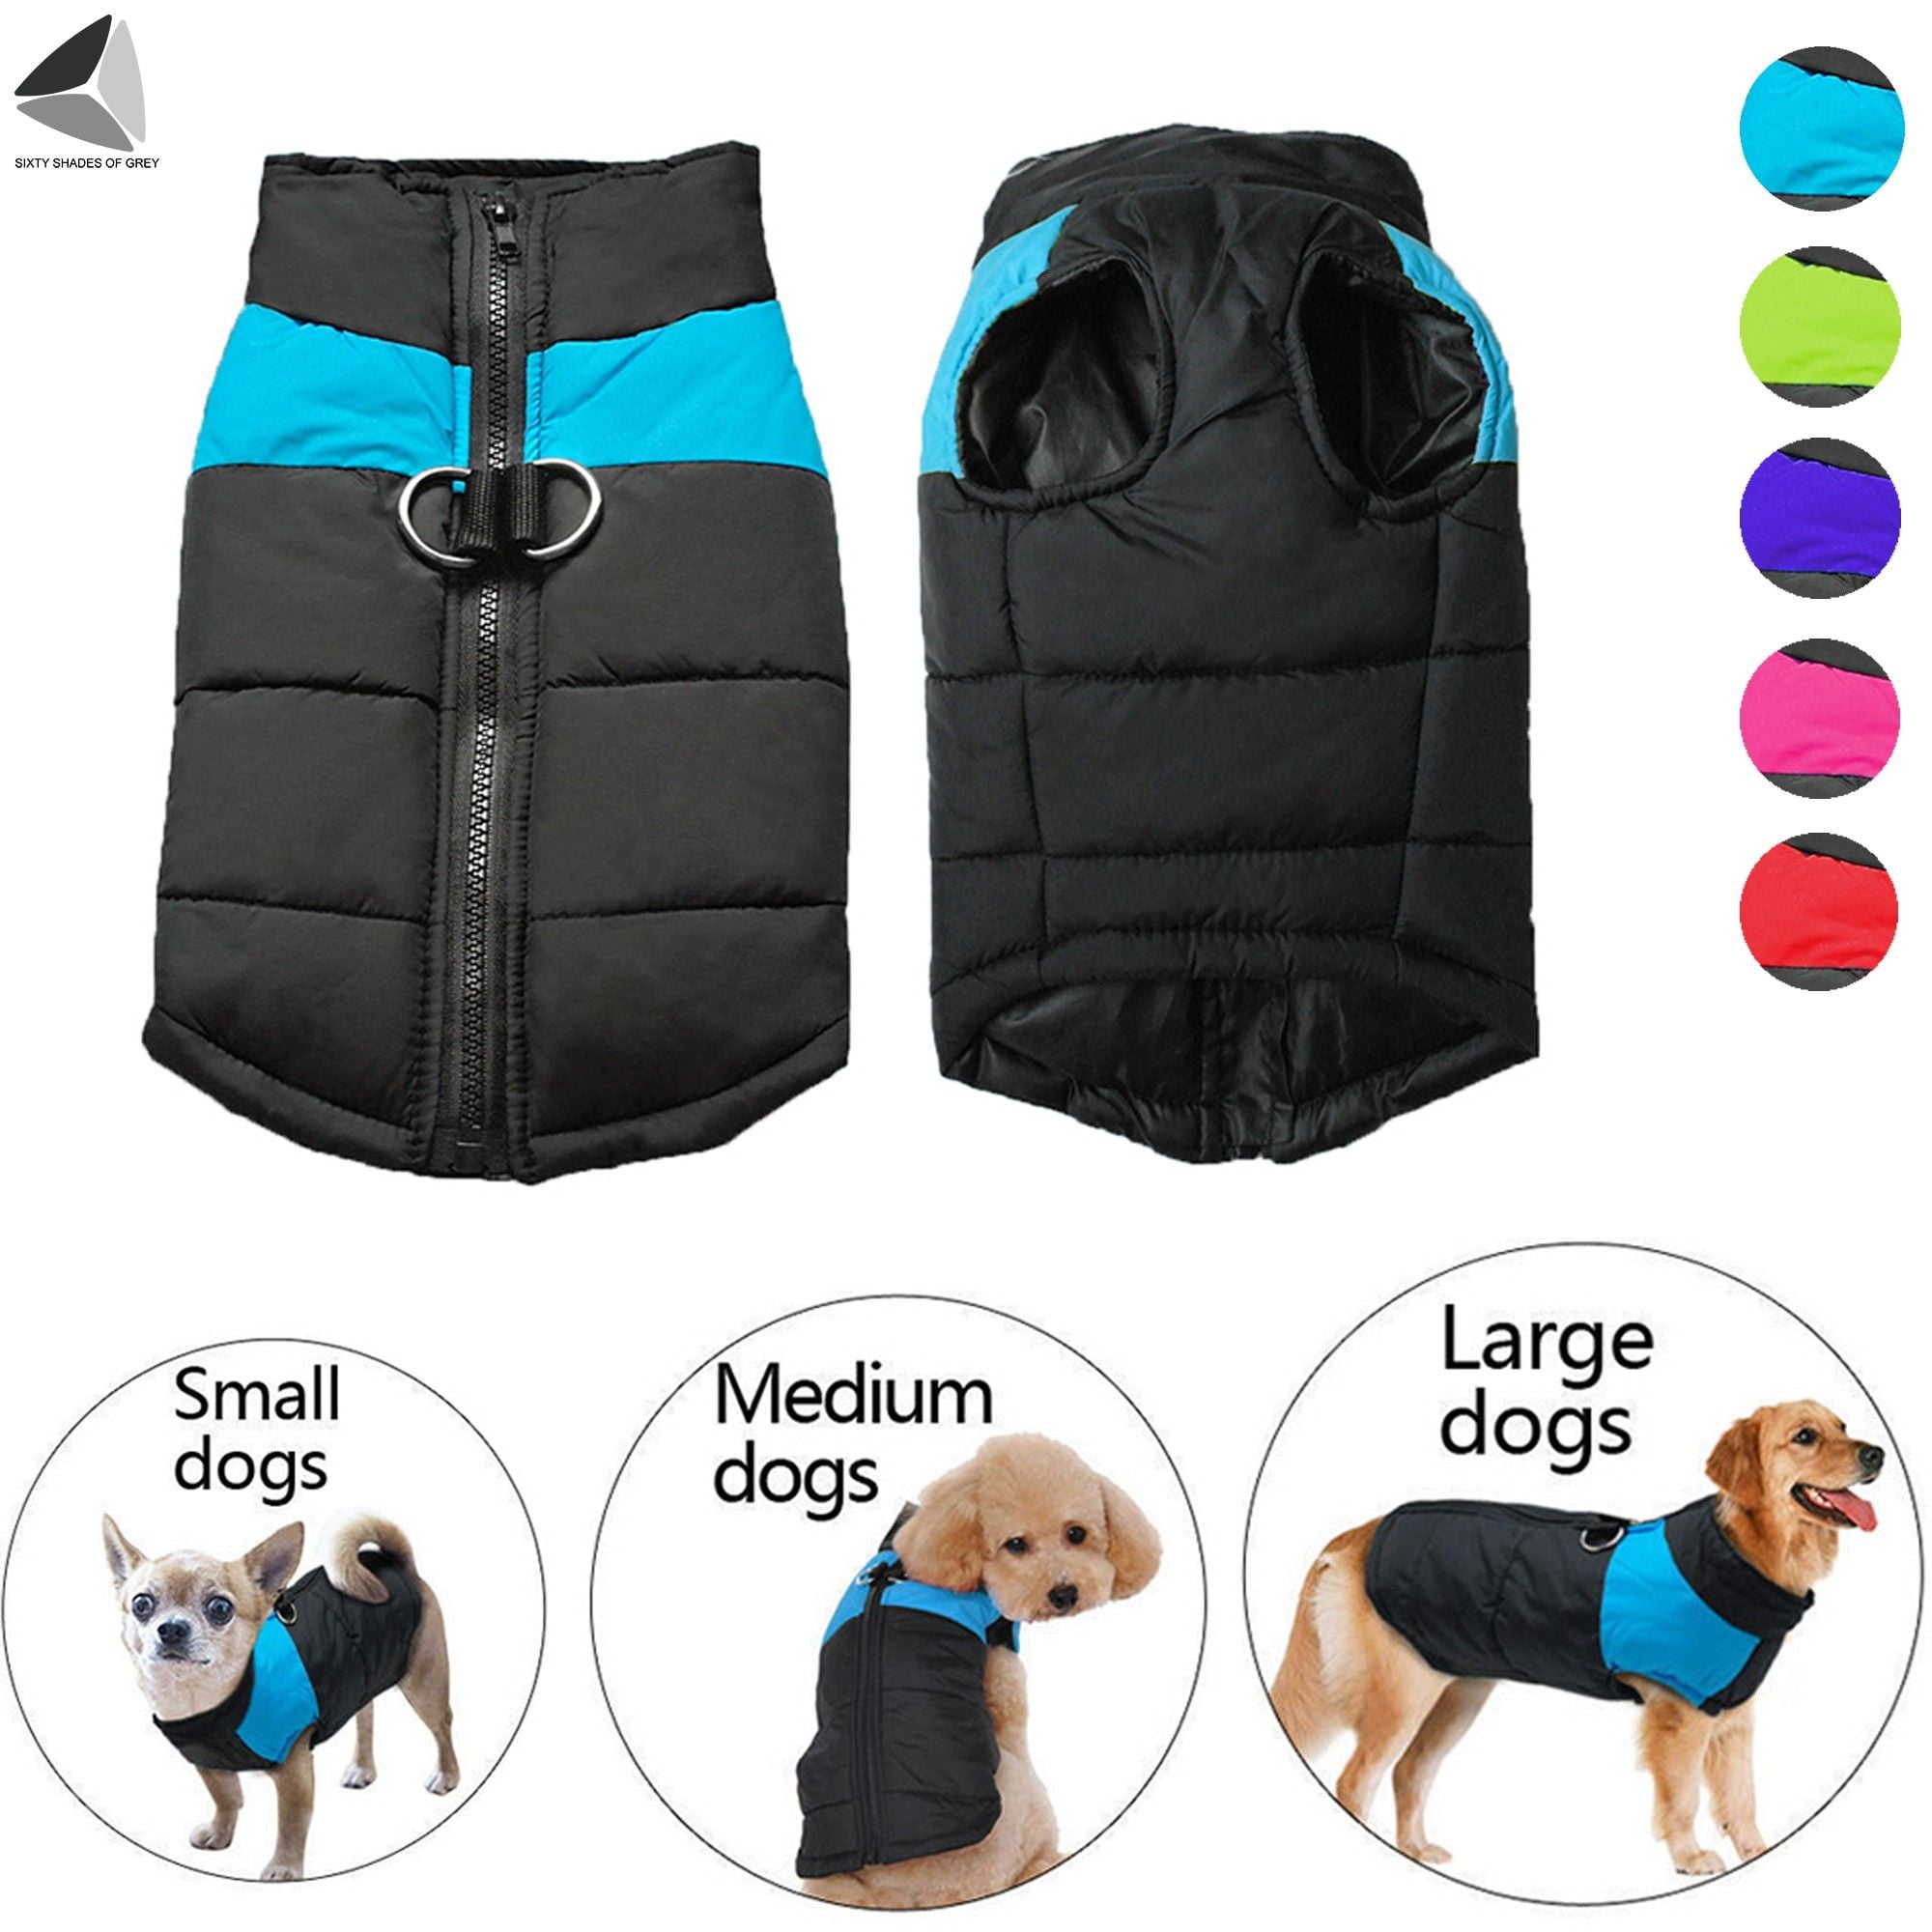 Reversible Windproof Warm Cotton Jacket Dog Clothes Outfit Vest for Small Medium Large Dogs with Harness Hole Idepet Winter Dog Coat XS, Blue